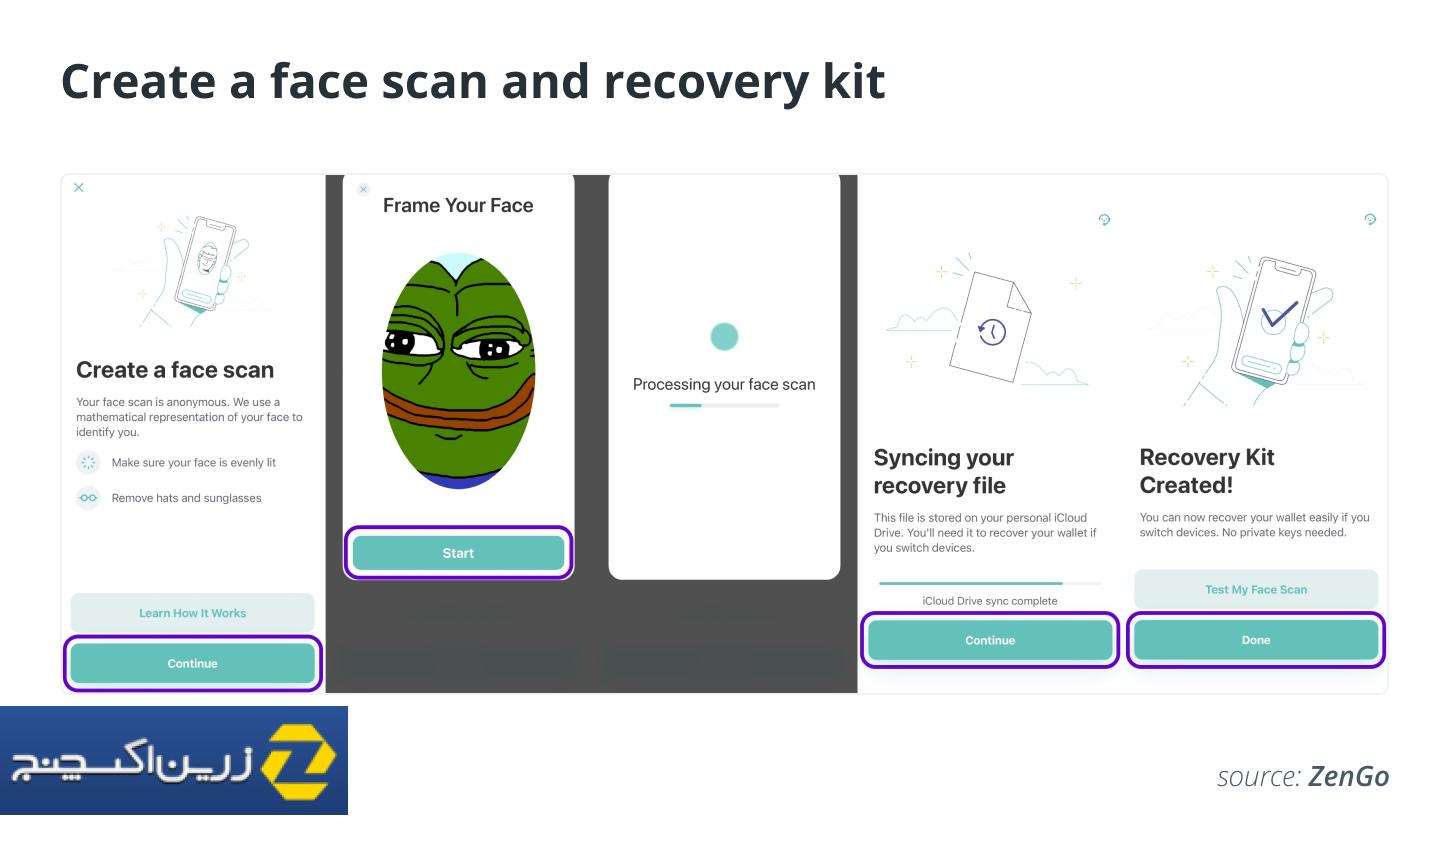 Create a face scan and recovery kit